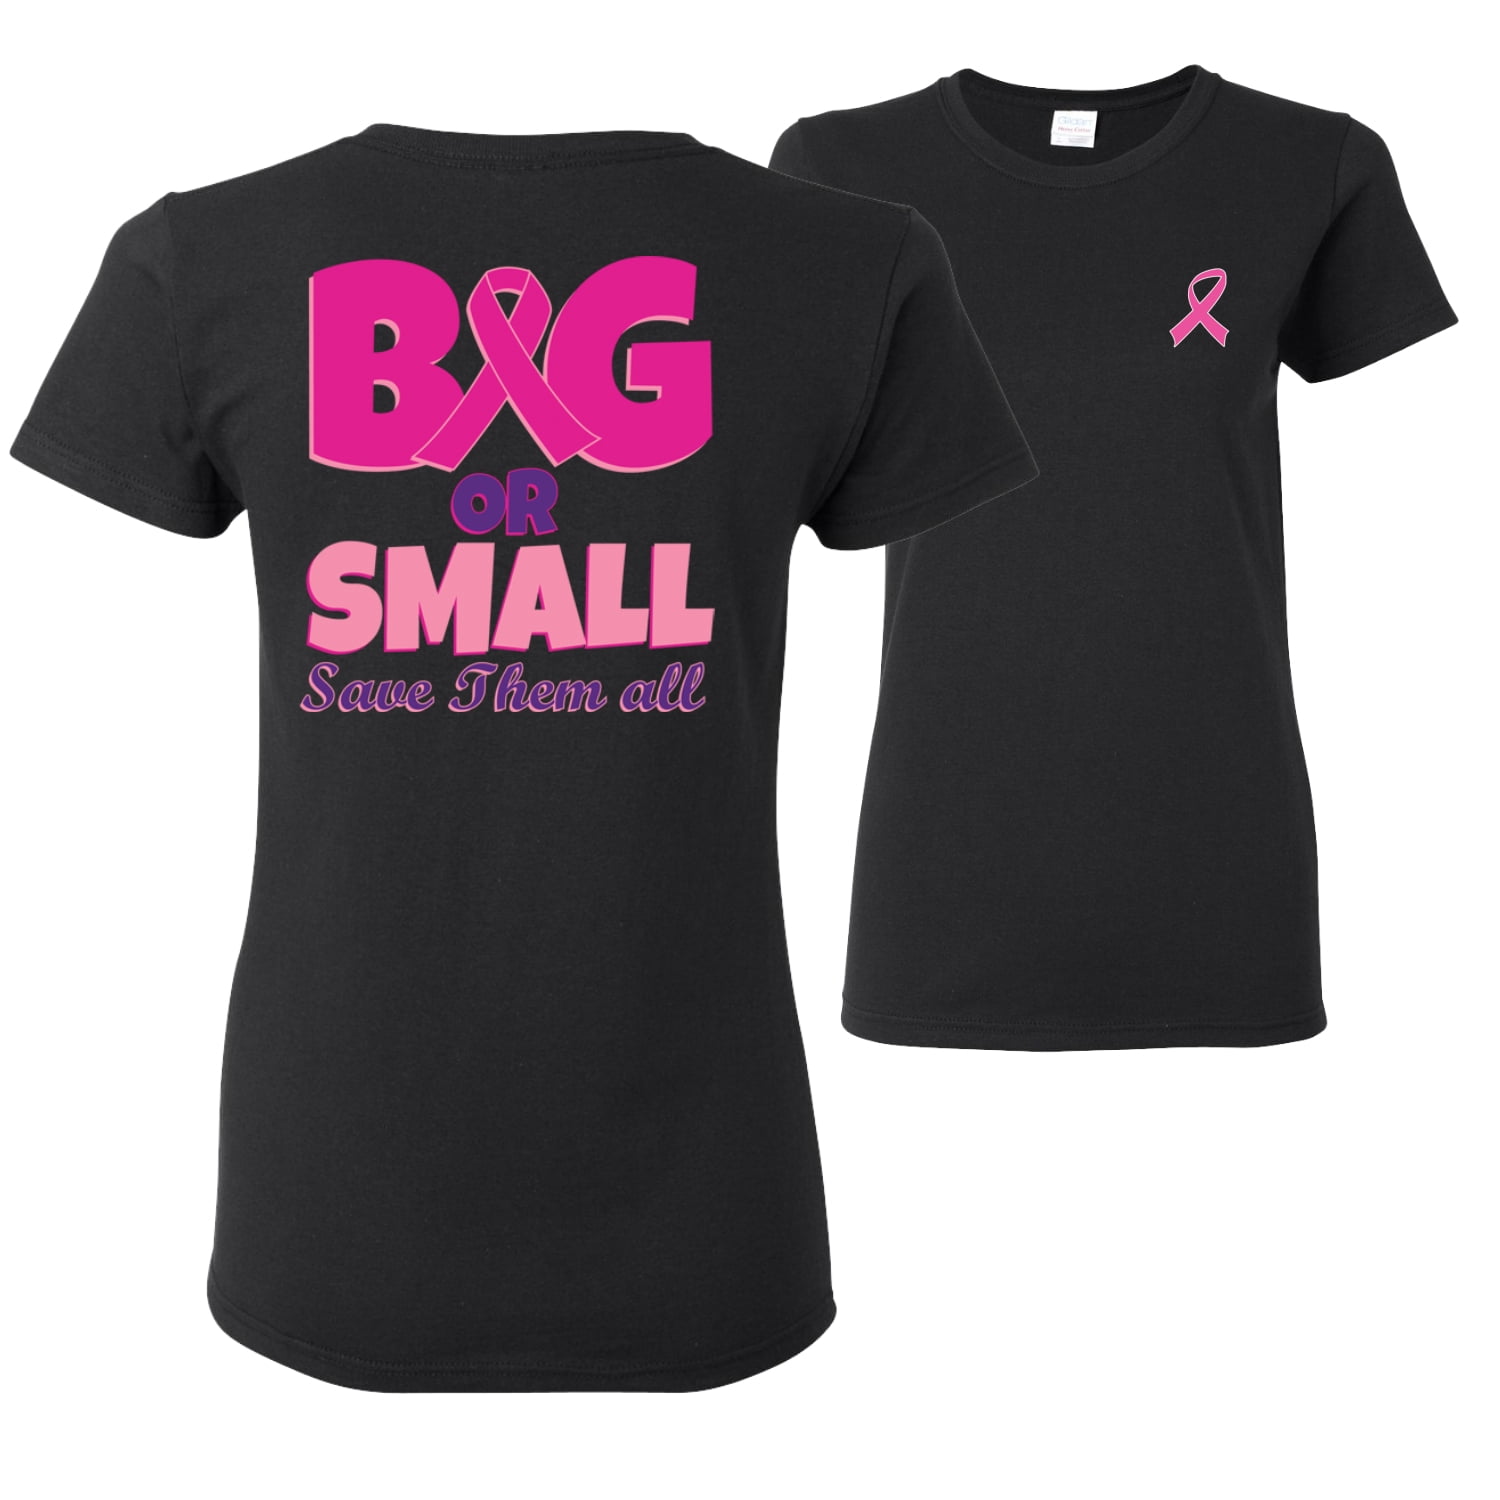 Women's save the big and small